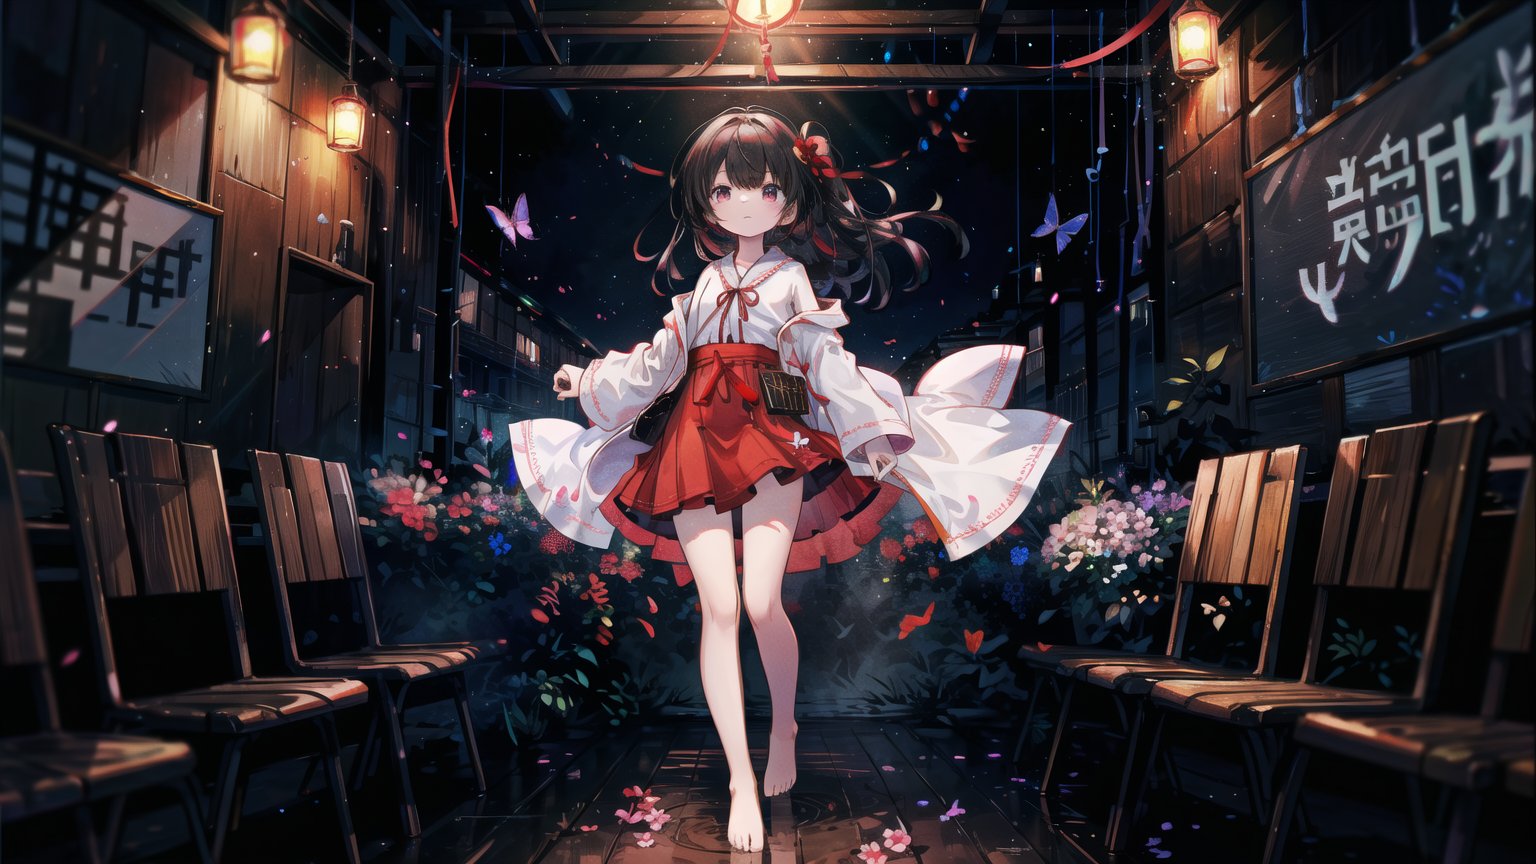 1 girl,HDR,high contrast,red classical robe,flying long hair,short skirt,hair tied with red ribbon,wind chimes,full body,soft clothing texture,eyes looking at the audience,flowers,butterflies,barefoot,red ribbon fluttering in the wind